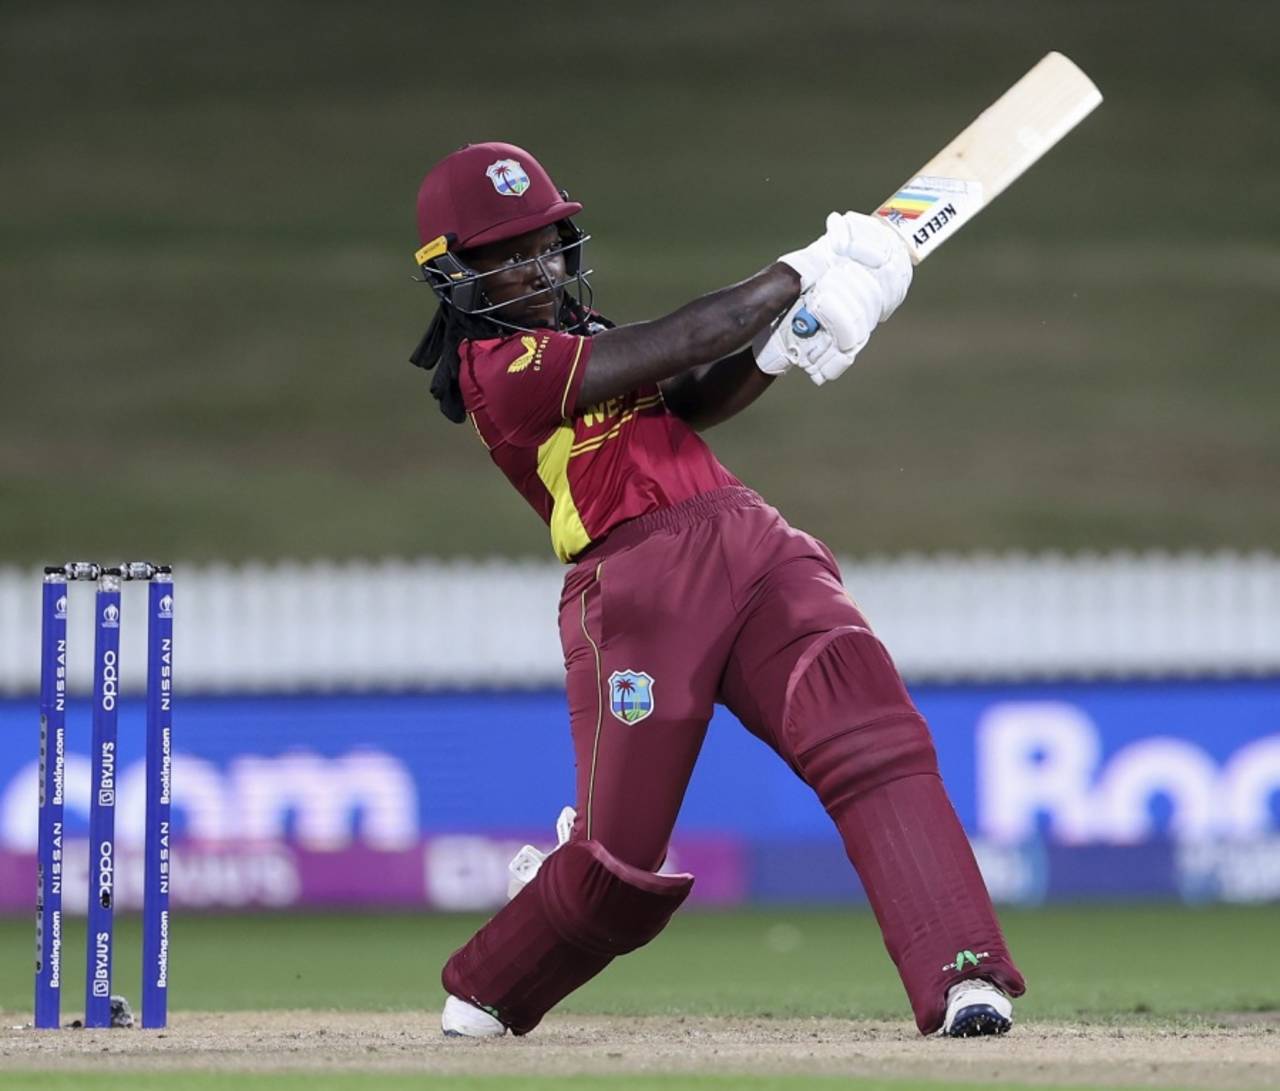 Deandra Dottin bashes one down the ground, West Indies vs Pakistan, Women's World Cup 2022, Hamilton, March 21, 2022